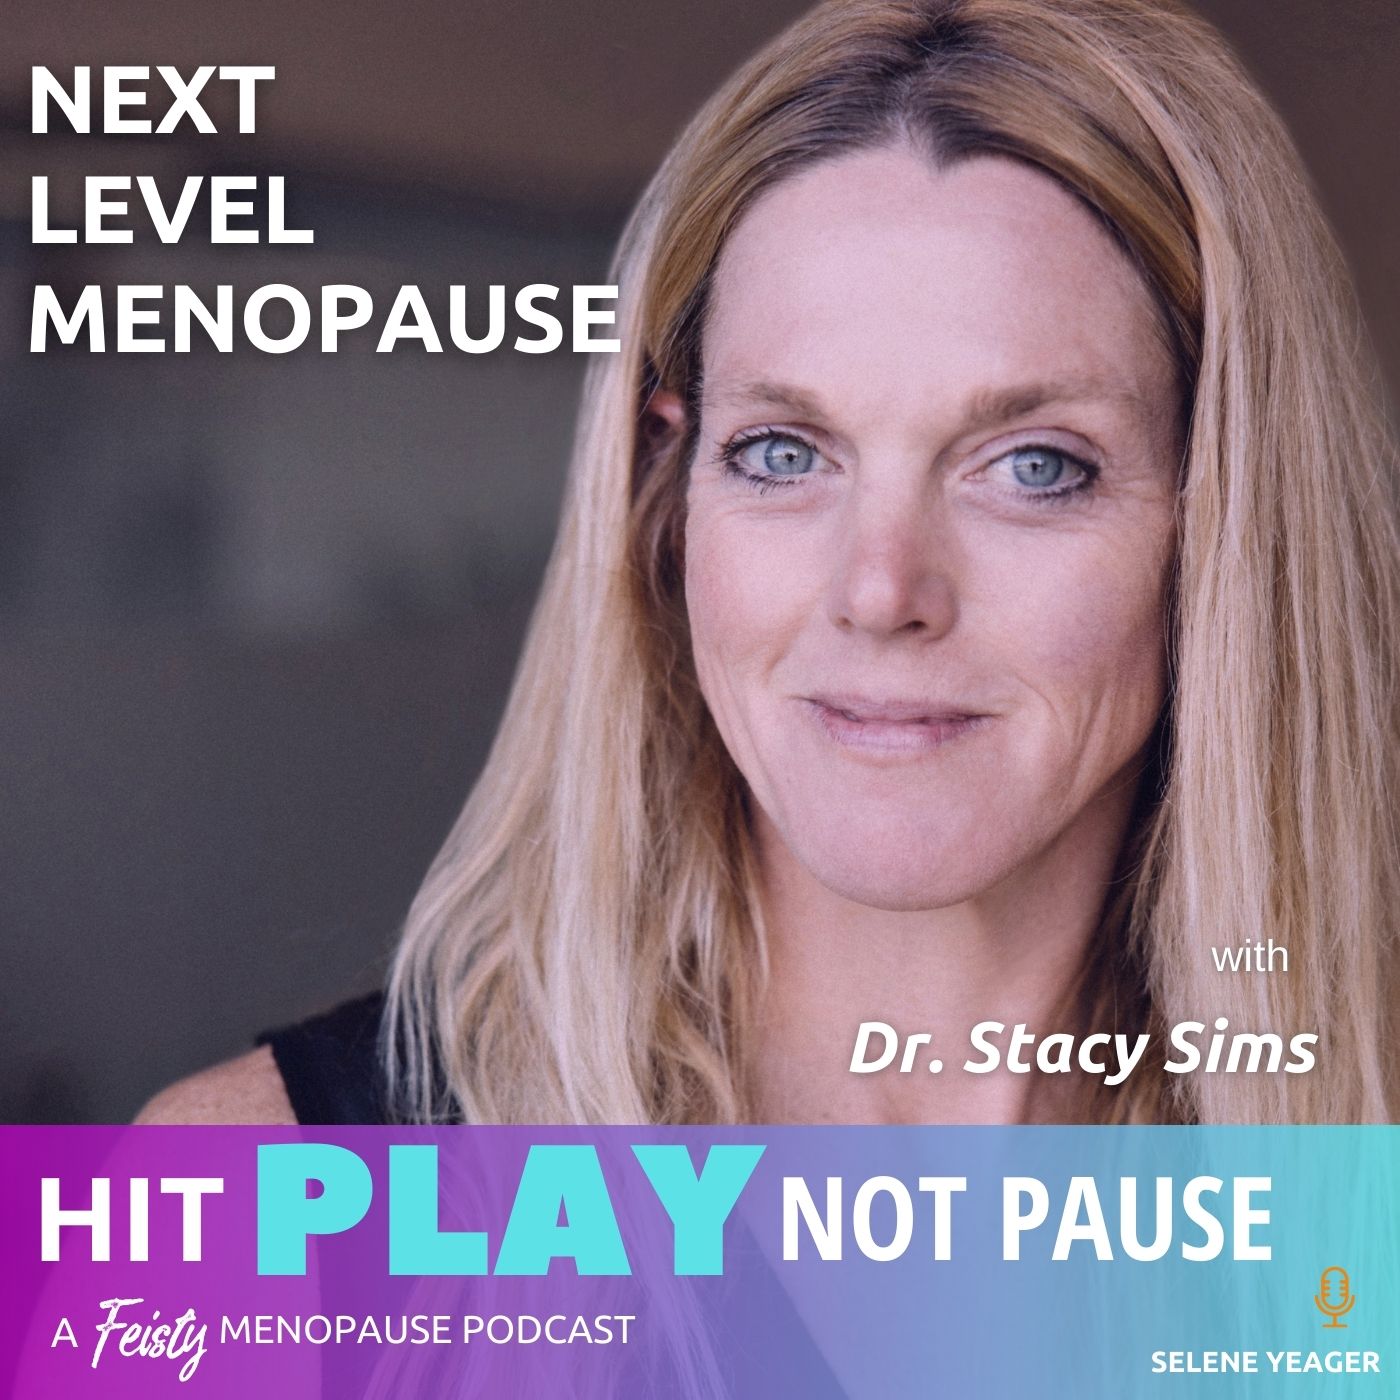 Artwork for podcast Hit Play Not Pause